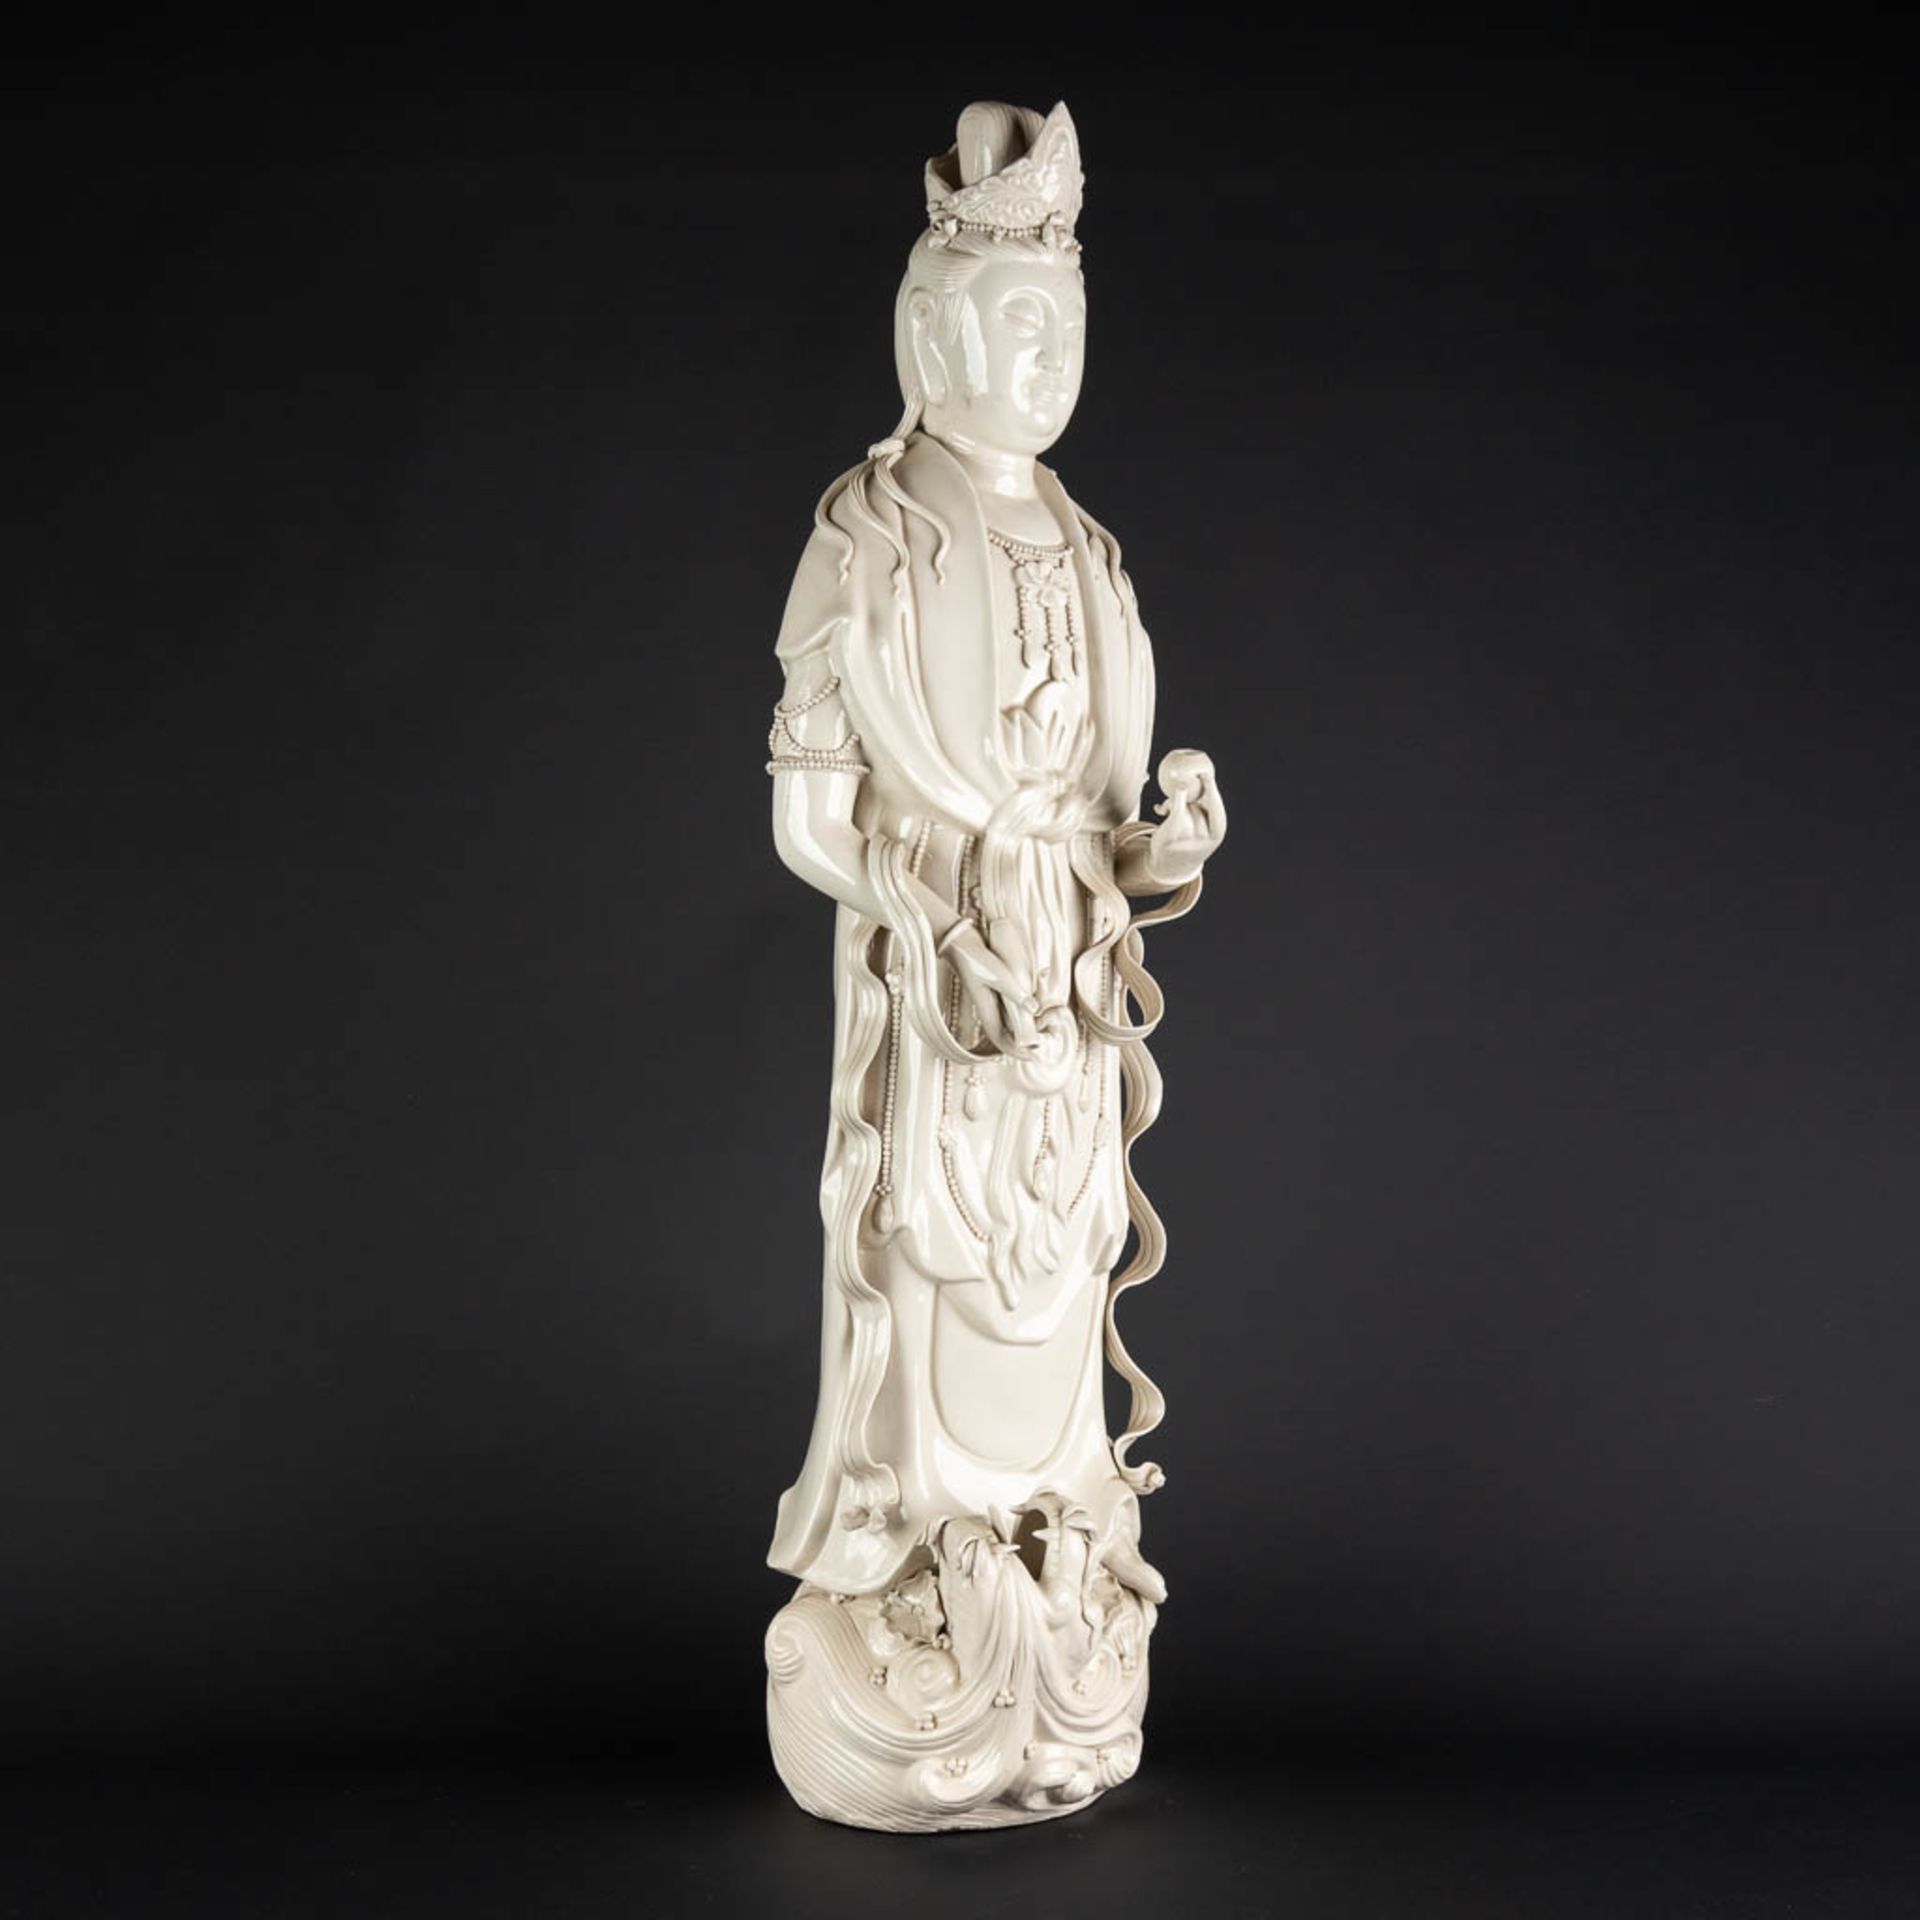 A large Chinese Guanyin figurine, blanc de chine porcelain. 20th C. (D:20 x W:23 x H:80 cm) - Image 7 of 13